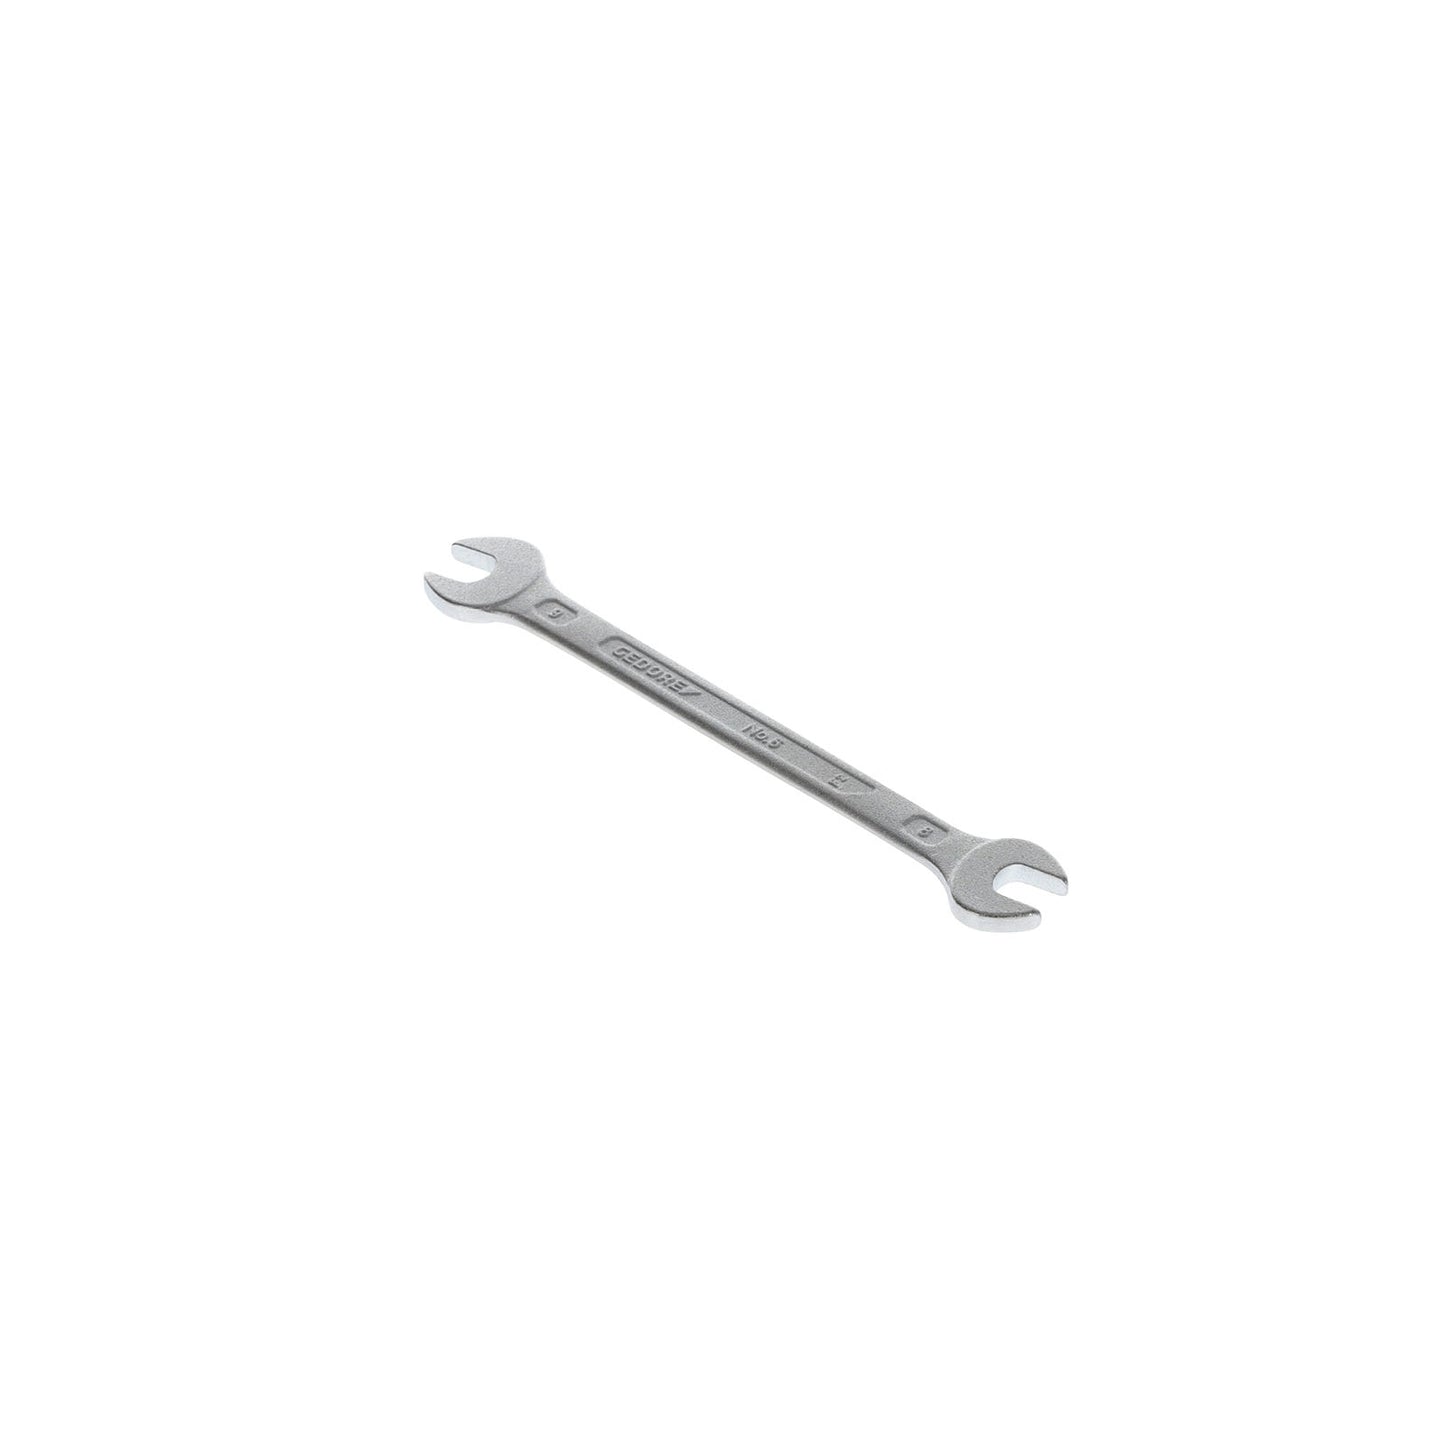 GEDORE 6 8X9 - 2-Mount Fixed Wrench, 8x9 (6064210)